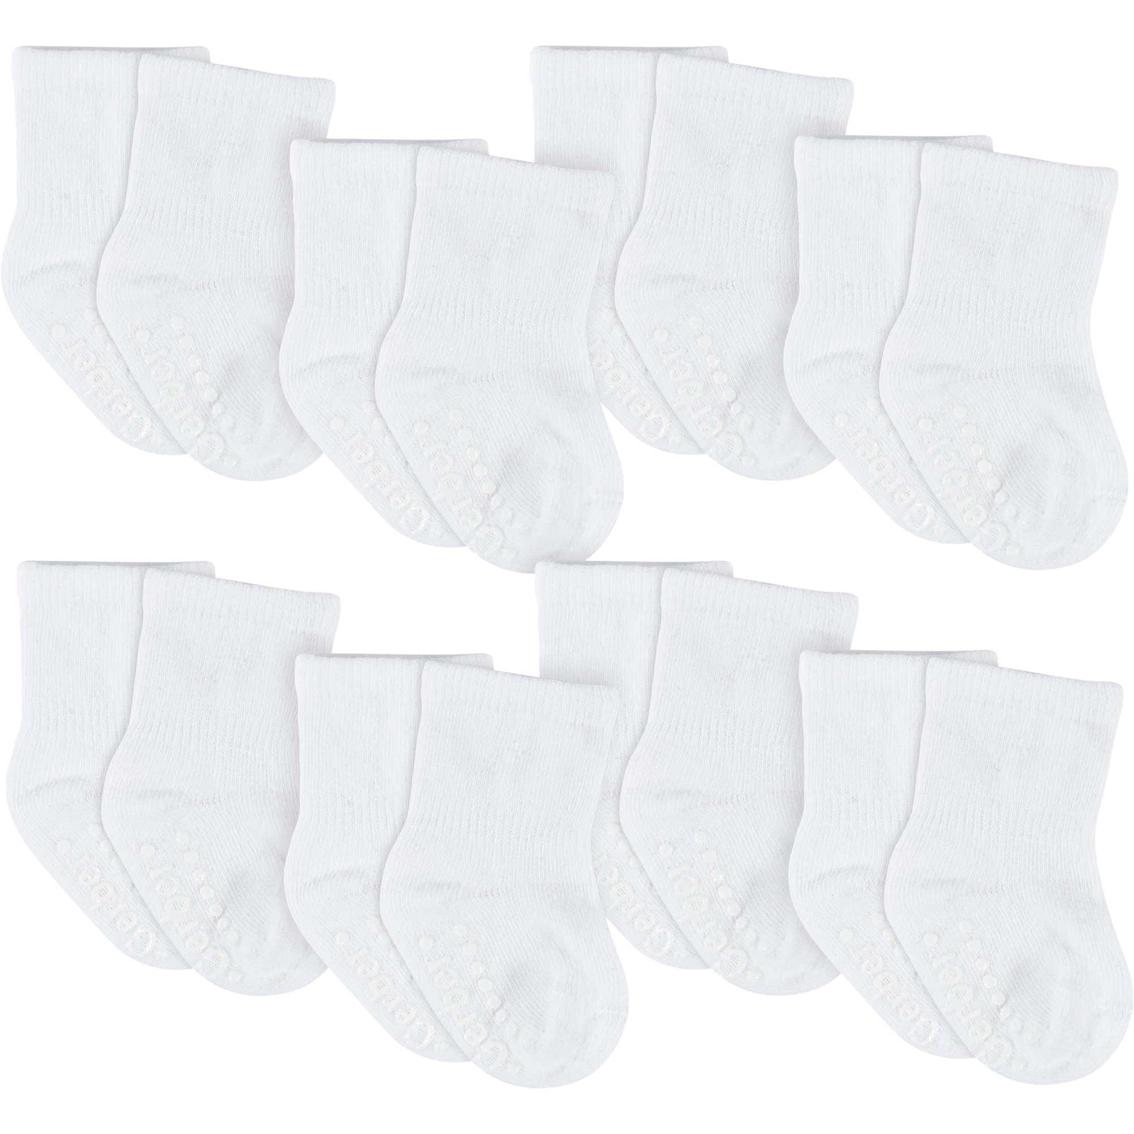 Gerber White Terry Wiggle Proof Socks 6 Pk. | Baby Girl 0-24 Months ...